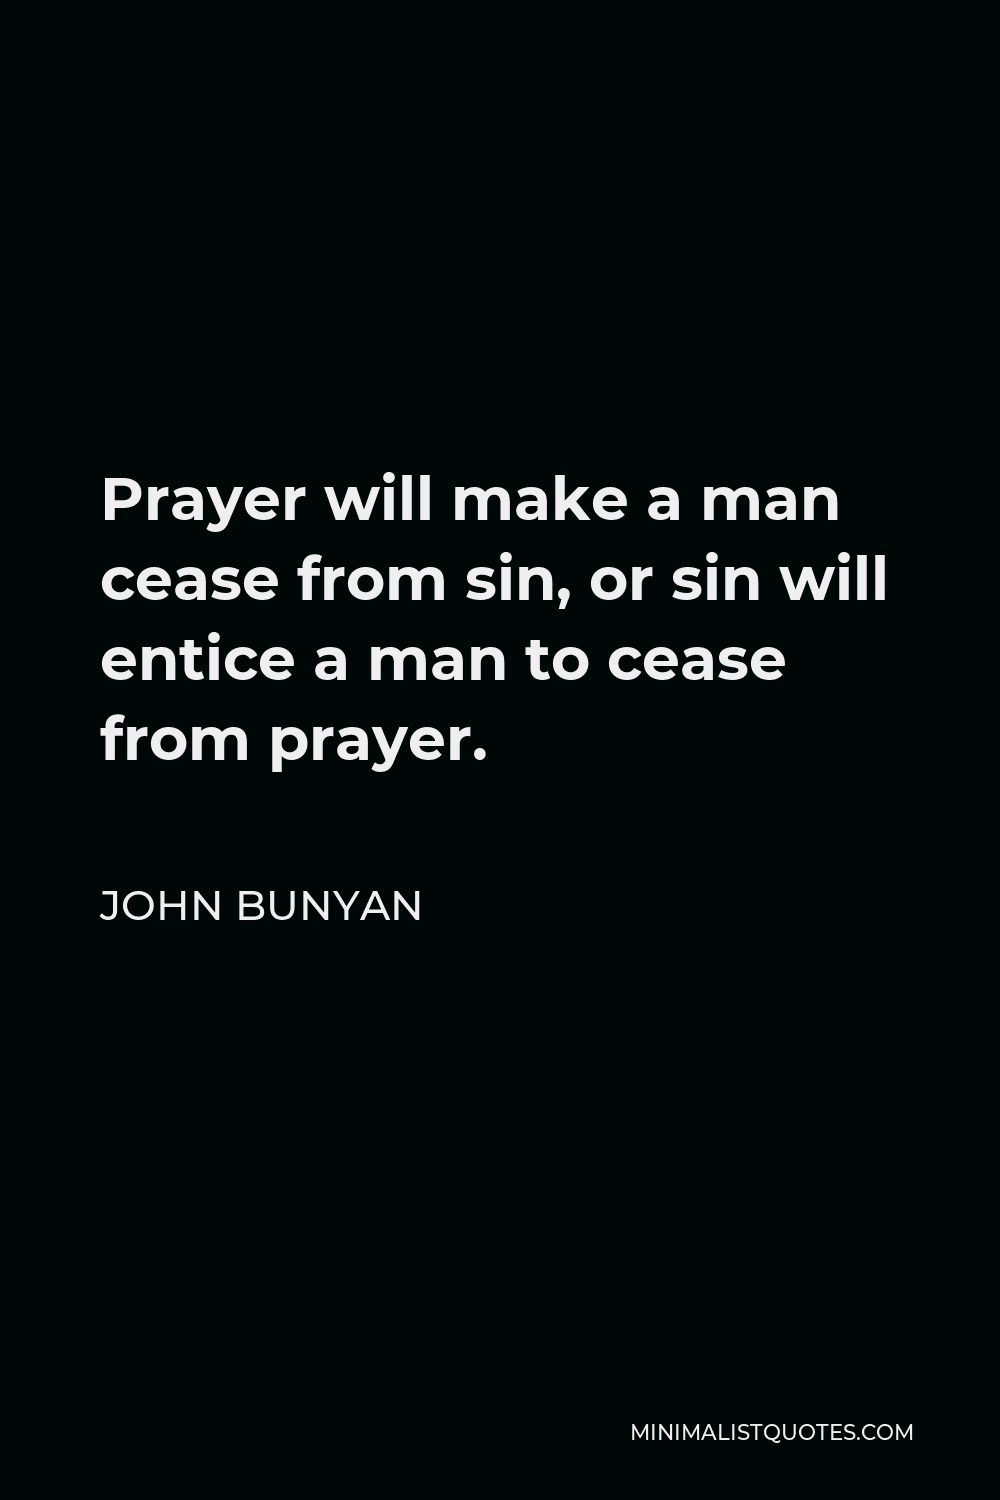 John Bunyan Quote - Prayer will make a man cease from sin, or sin will entice a man to cease from prayer.